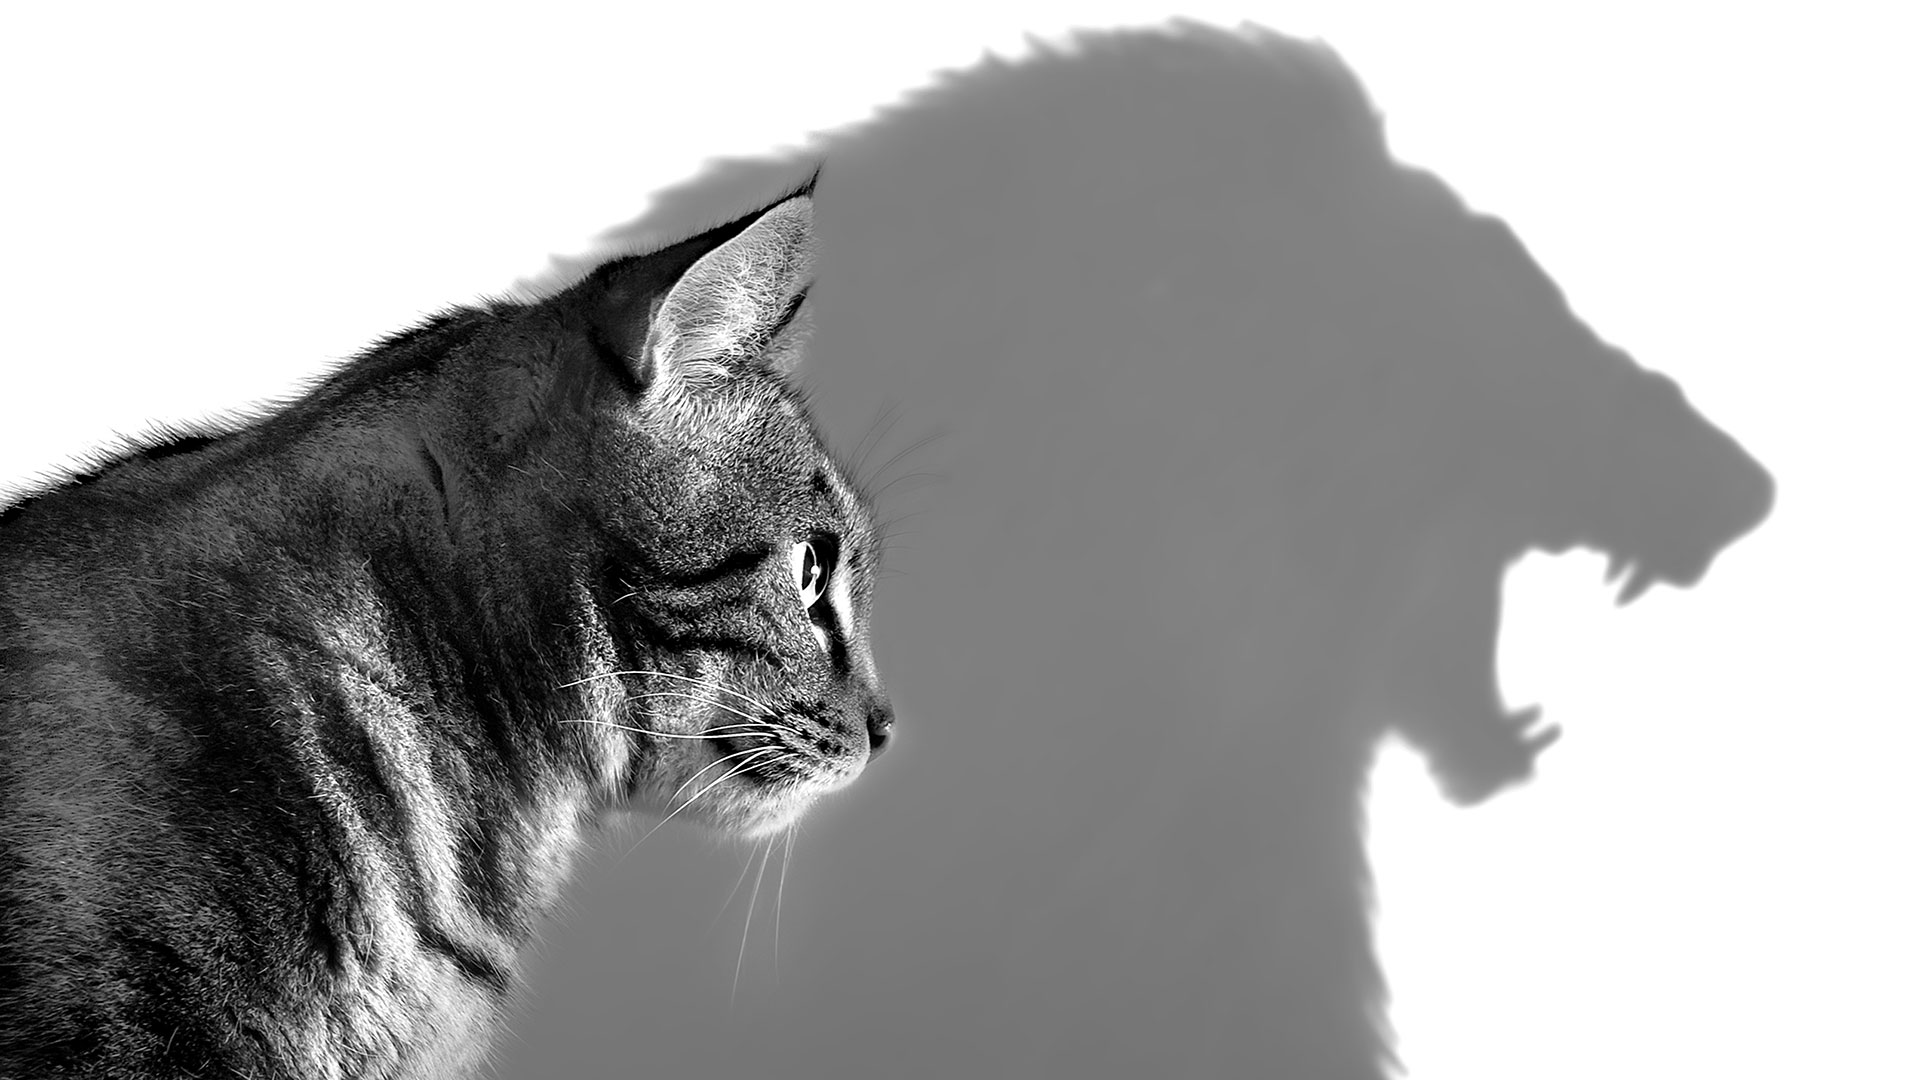 Cat casting shadow of lion